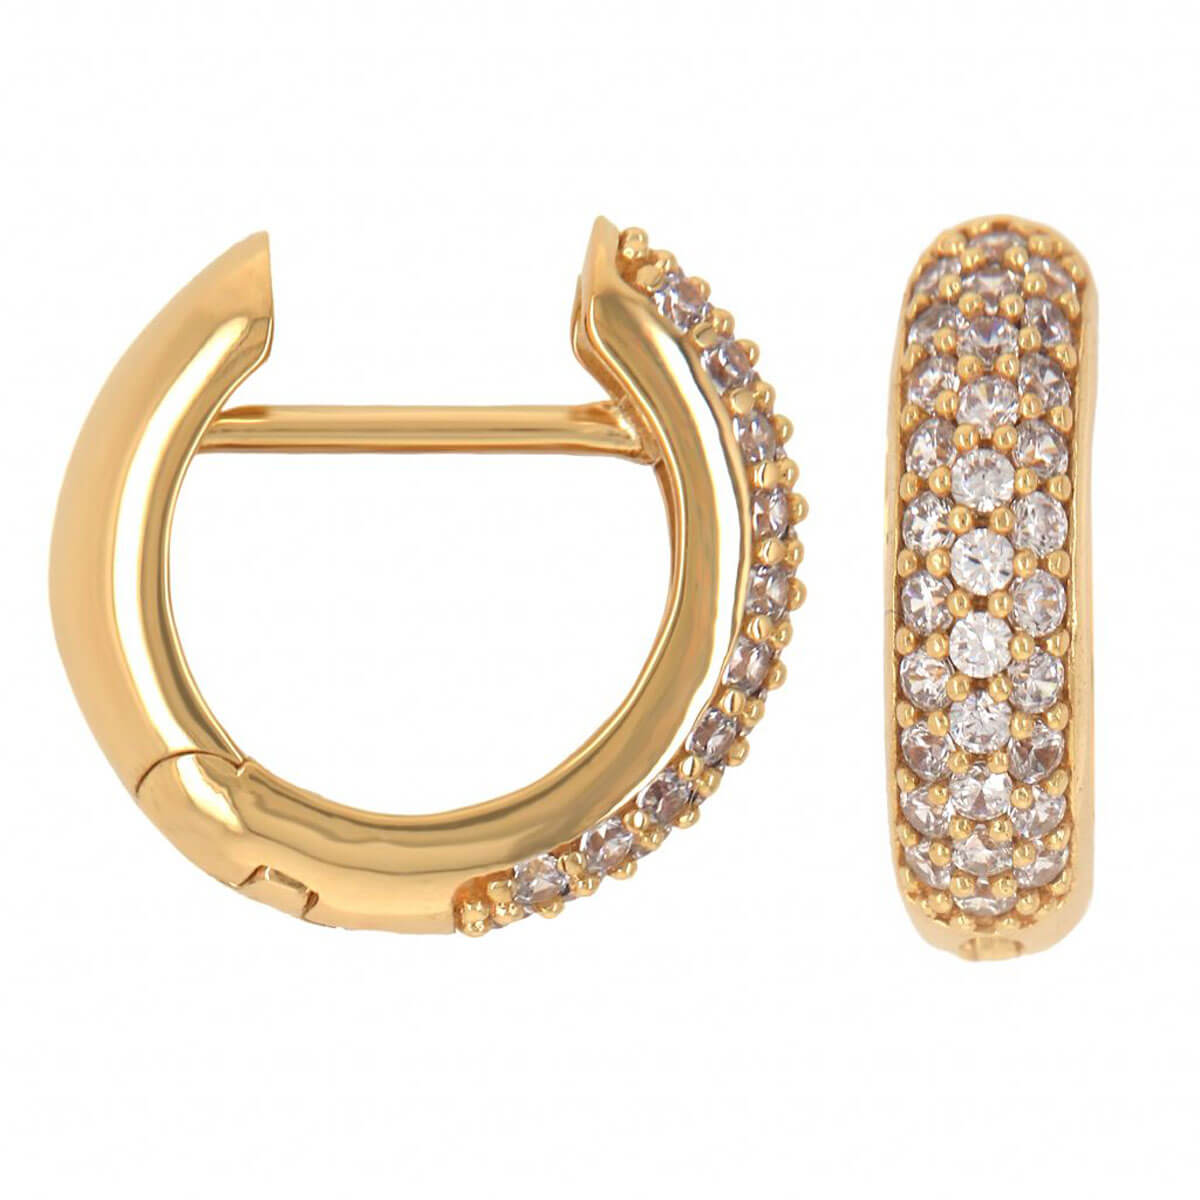 Gold Pave Hoops Earrings | Alini Handcrafted Jewelry